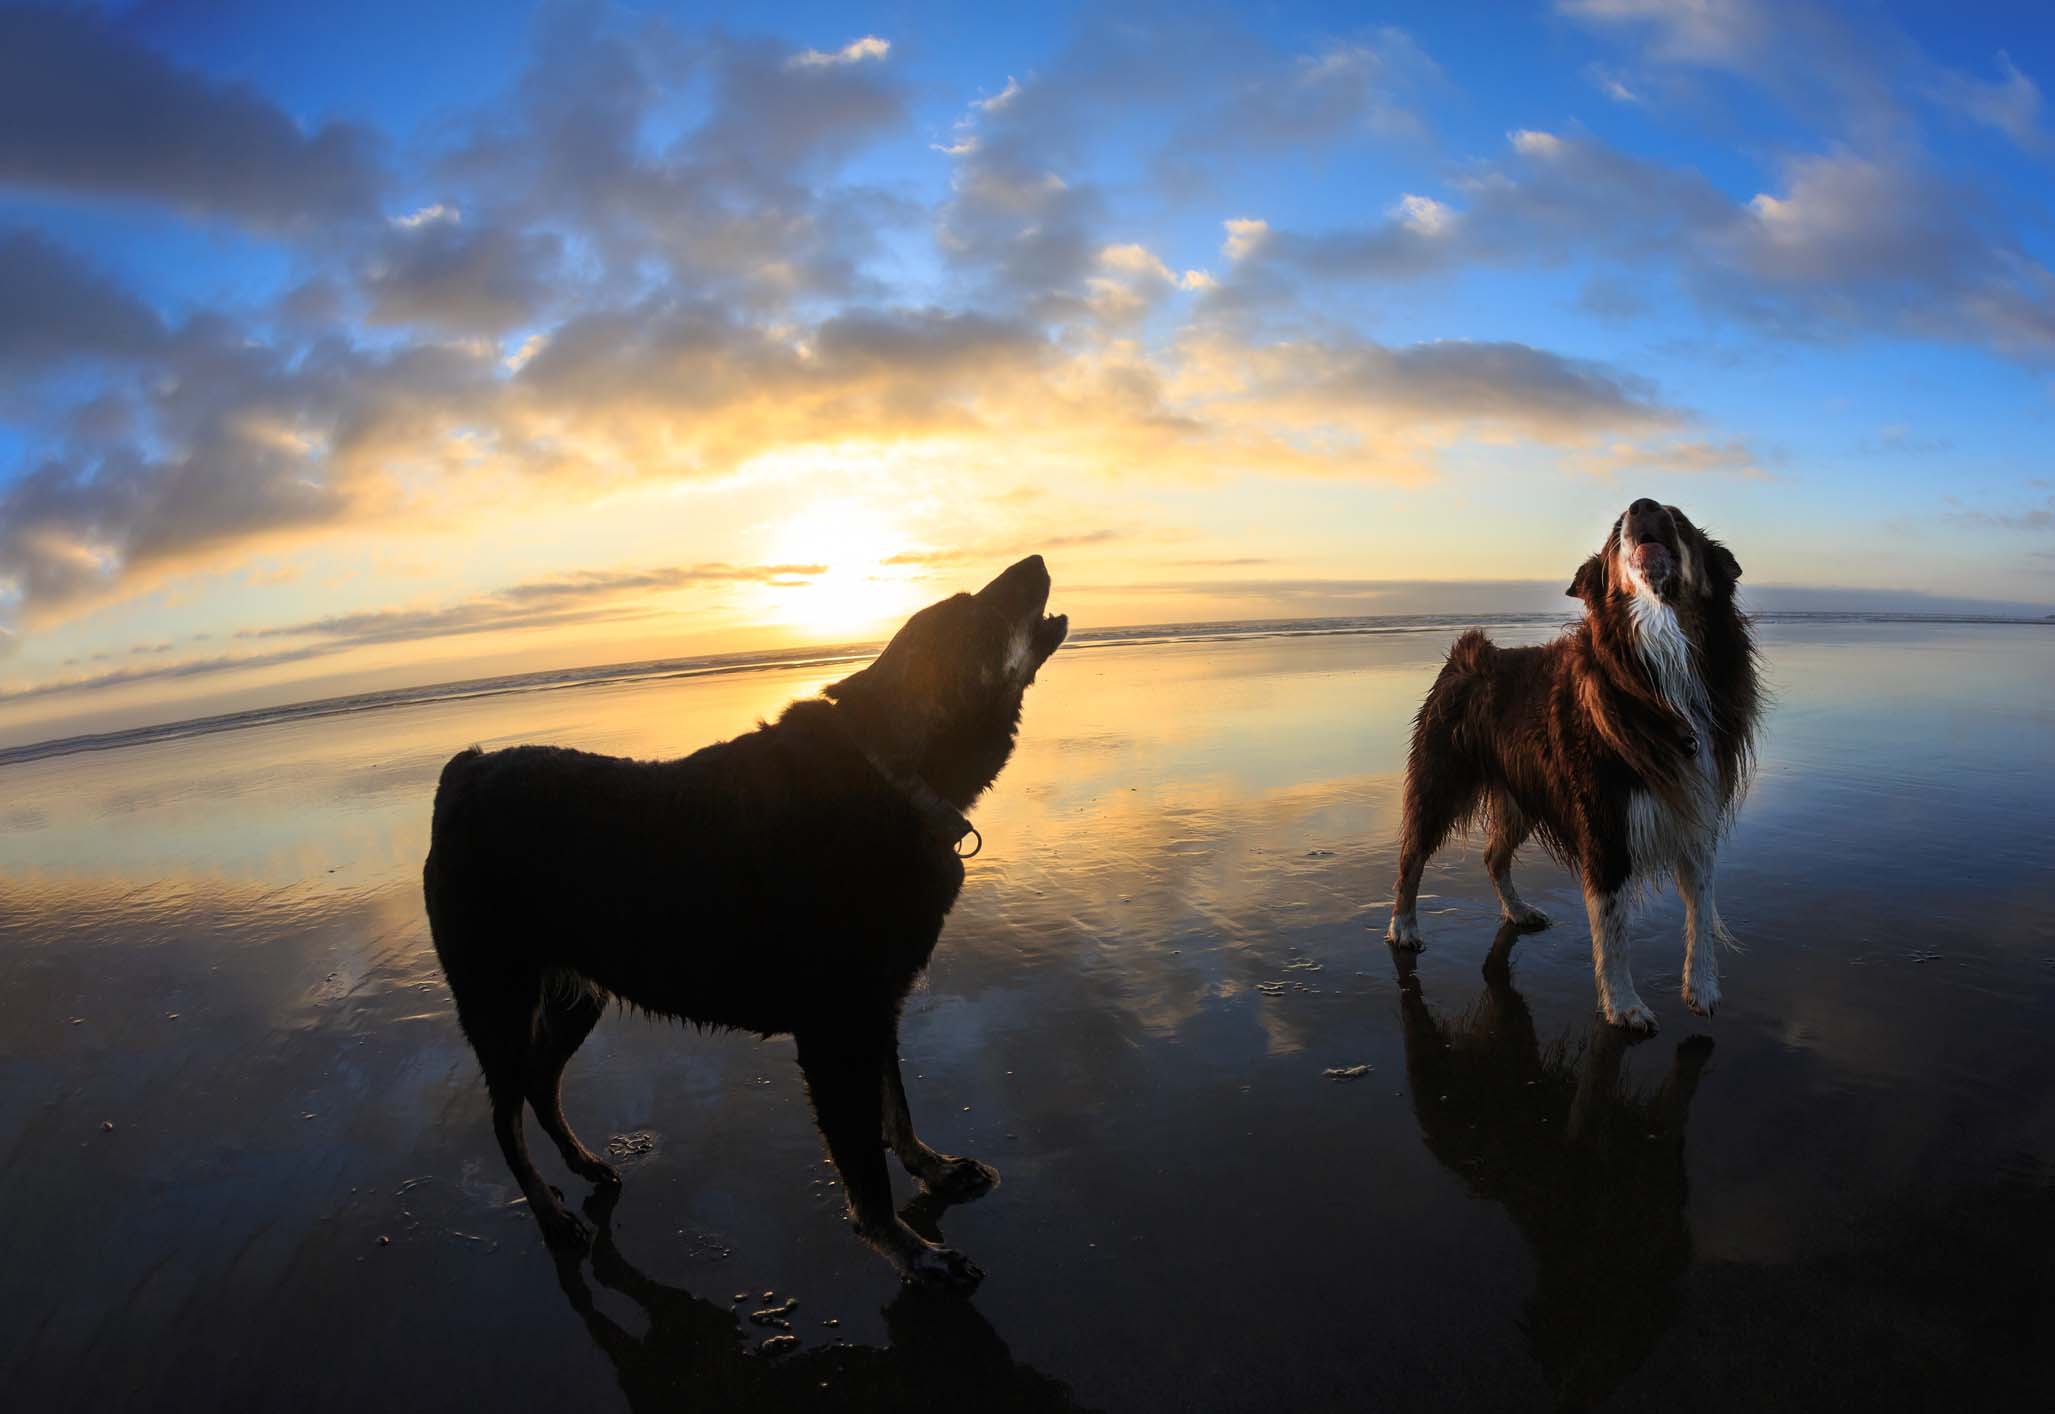 A pair of dogs howl into the sky against an ocean backdrop.